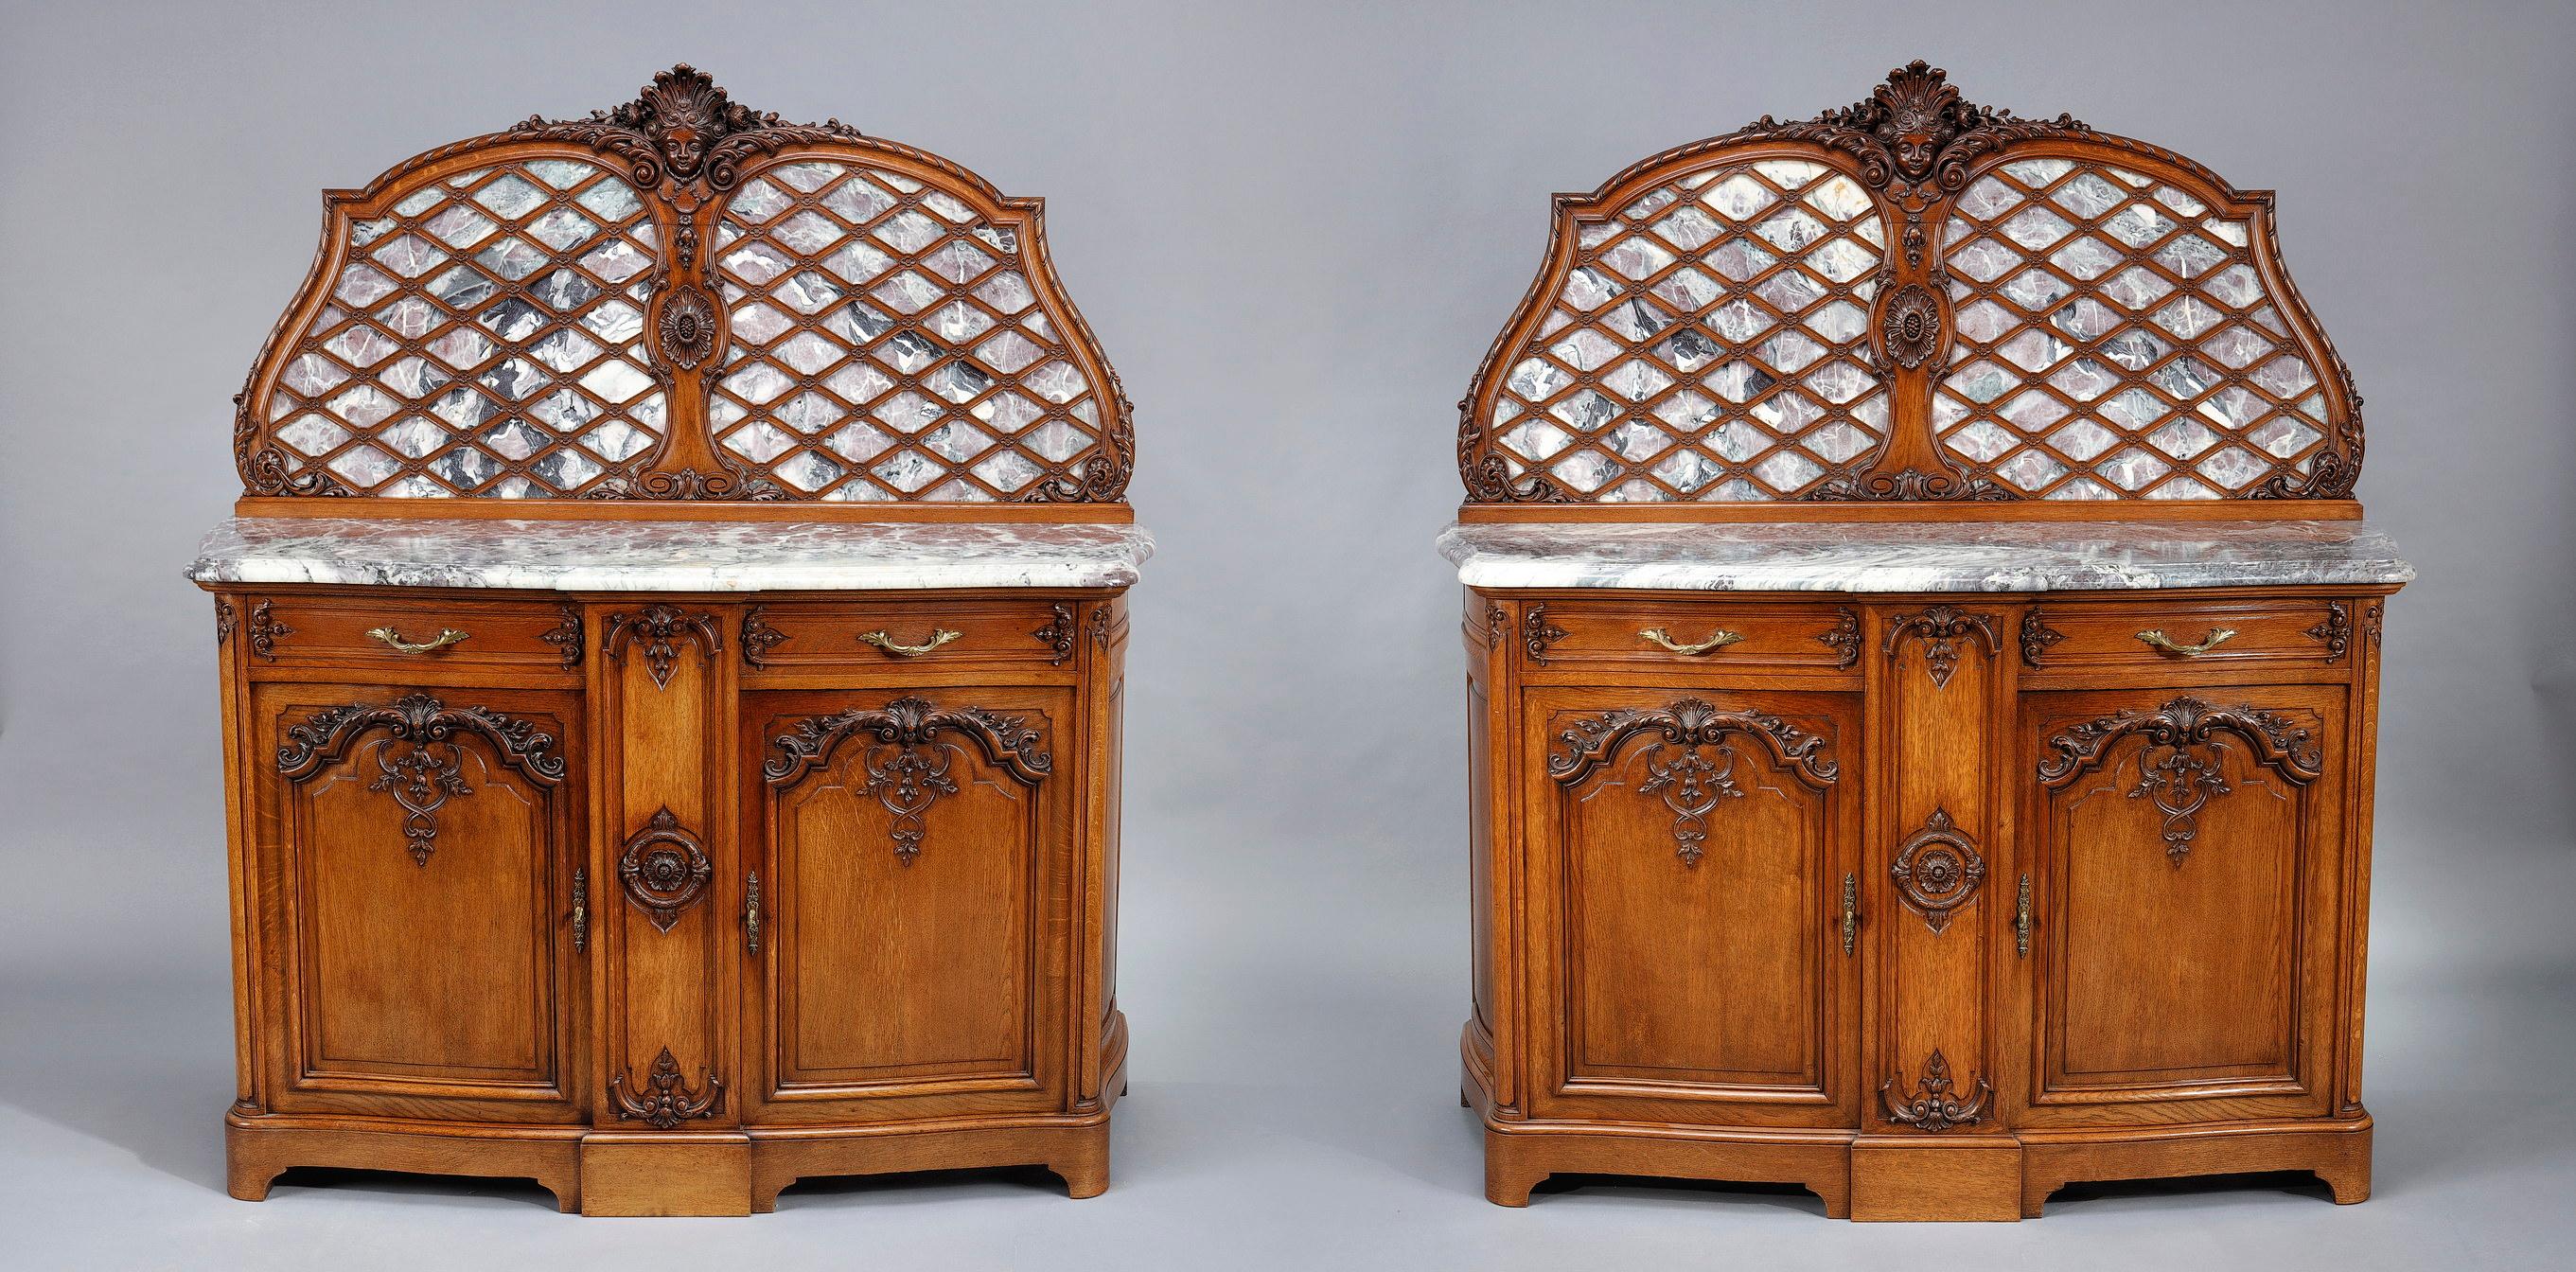 Pair of Regency-style sideboards in molded oak and marble For Sale 1